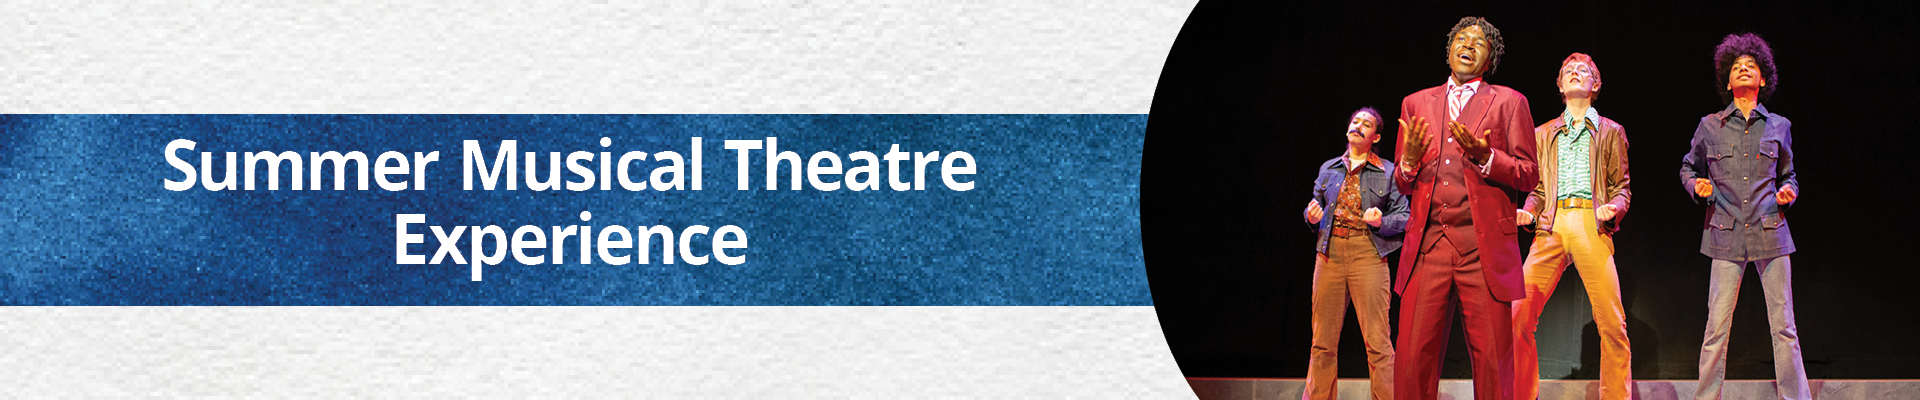 Summer Musical Theatre Experience Banner